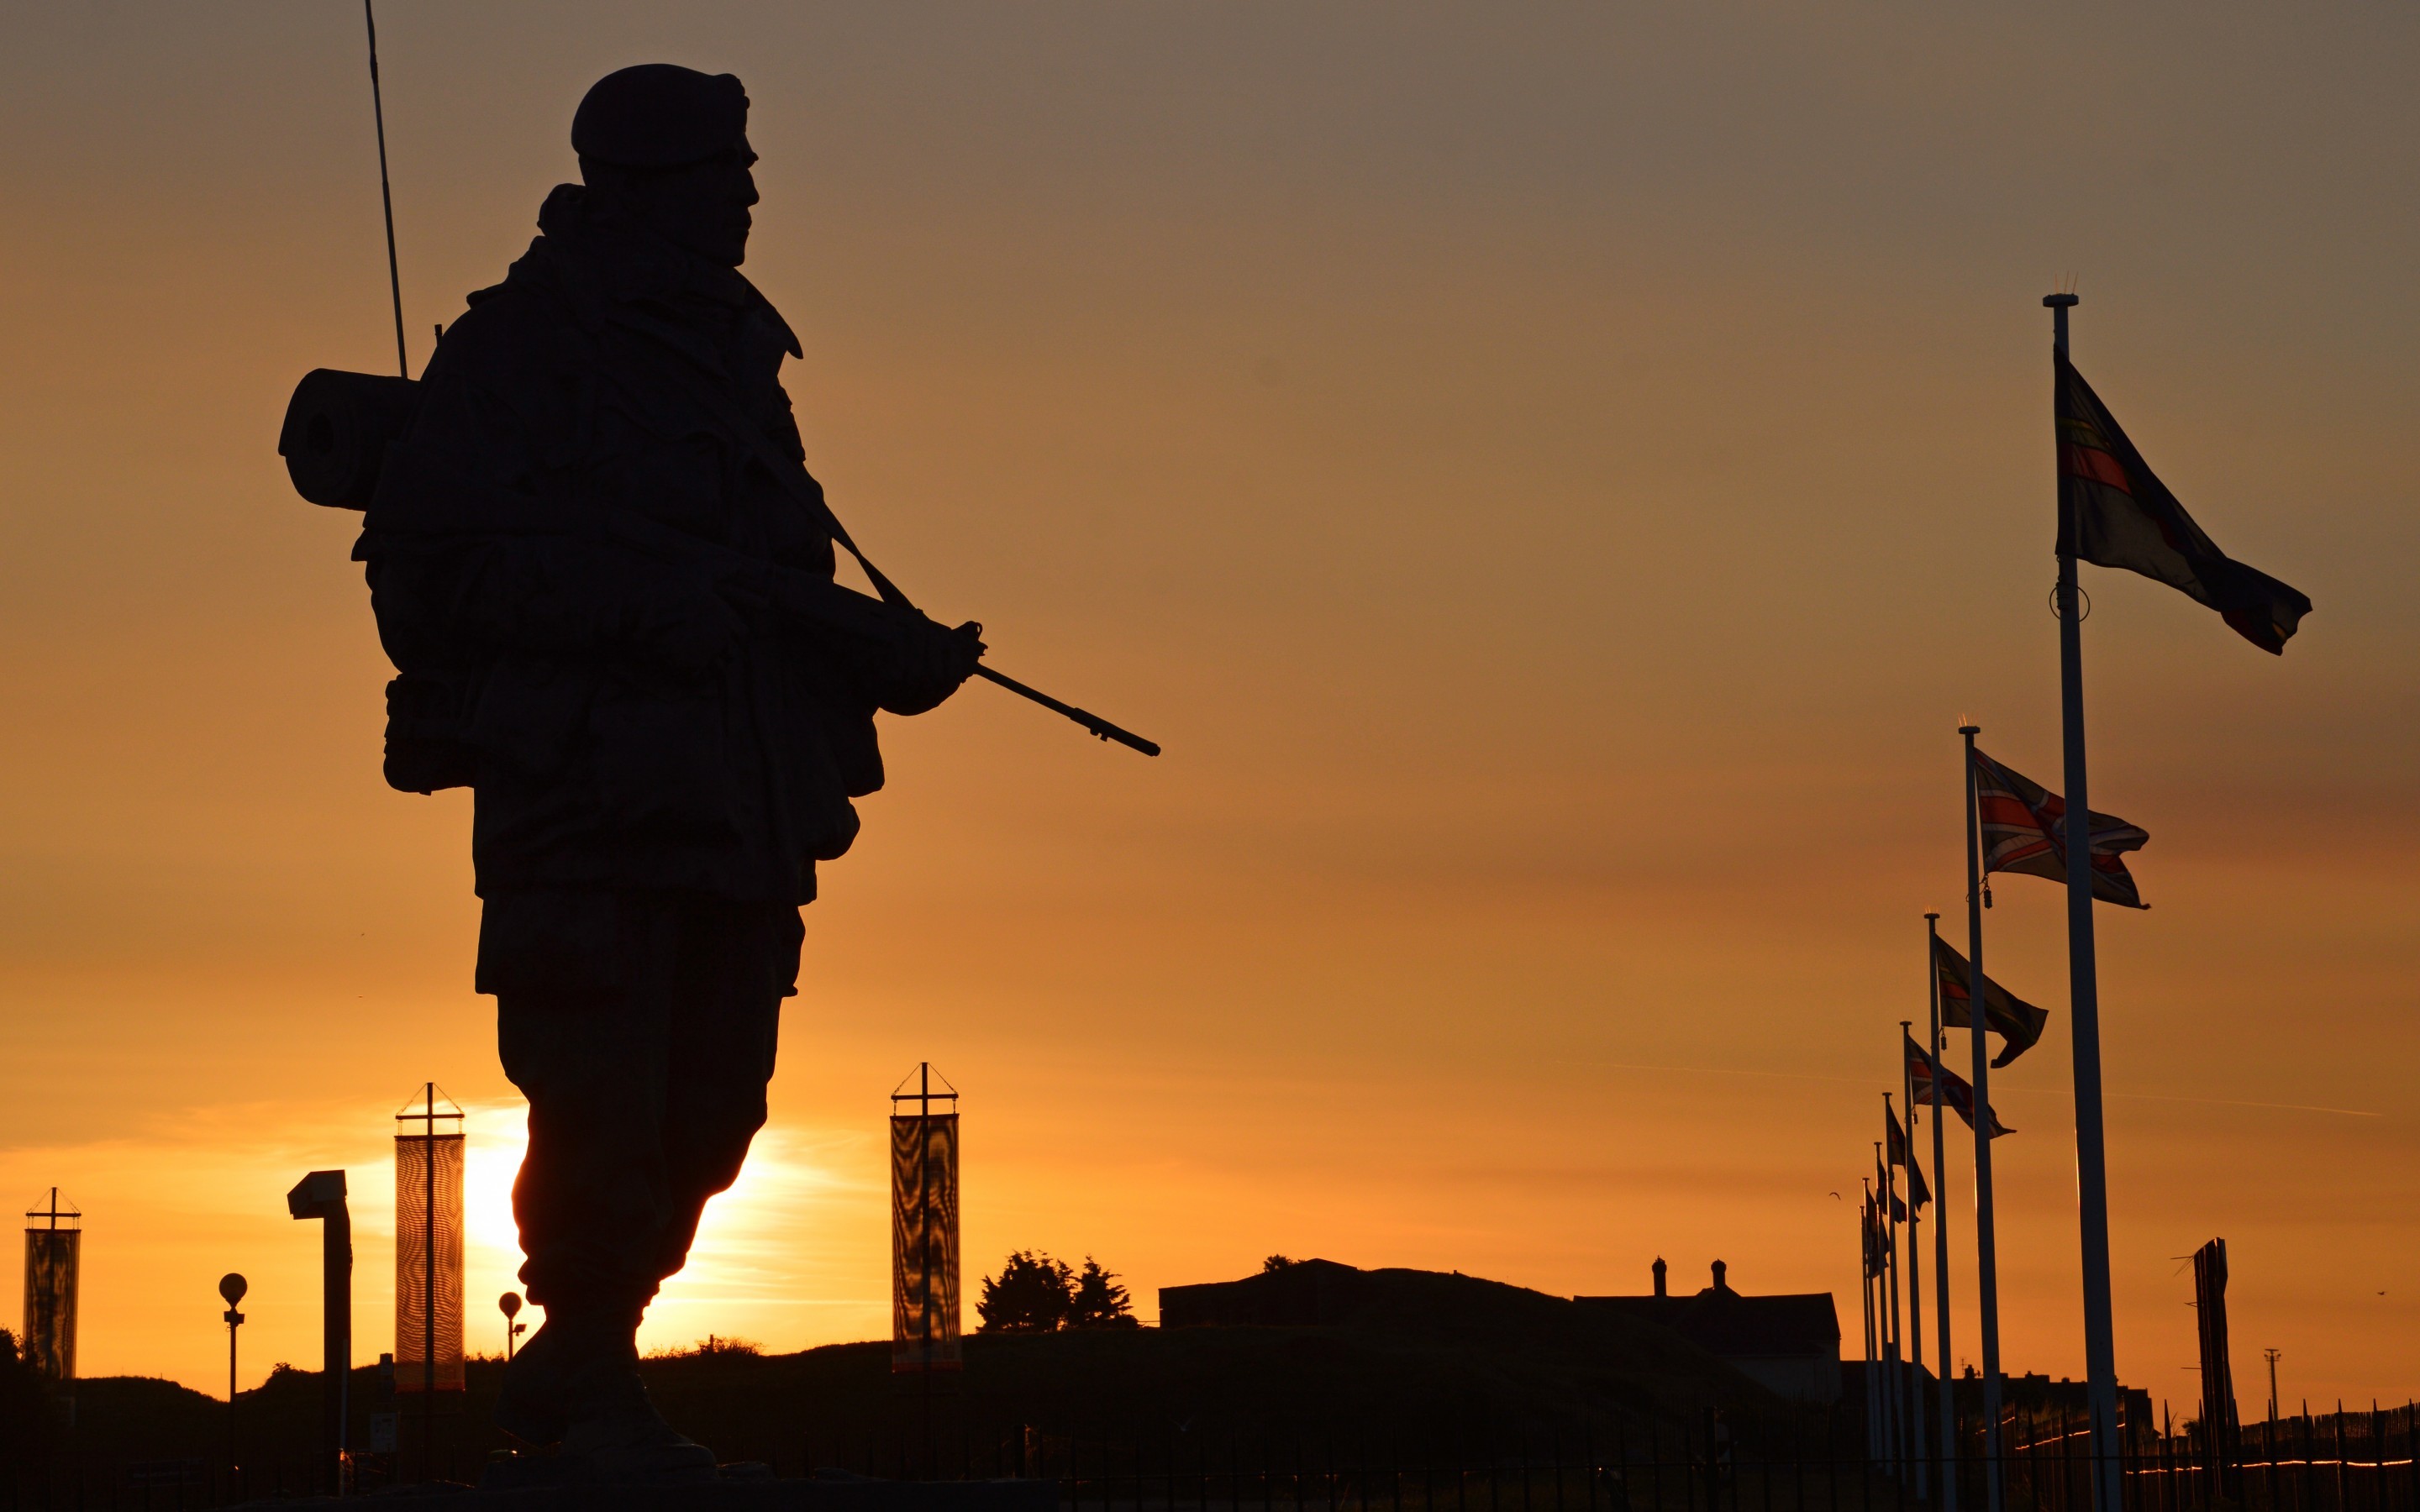 2880x1800 sun sunset silhouette commandos soldiers weapons equipment royal marines UK  military wallpaper